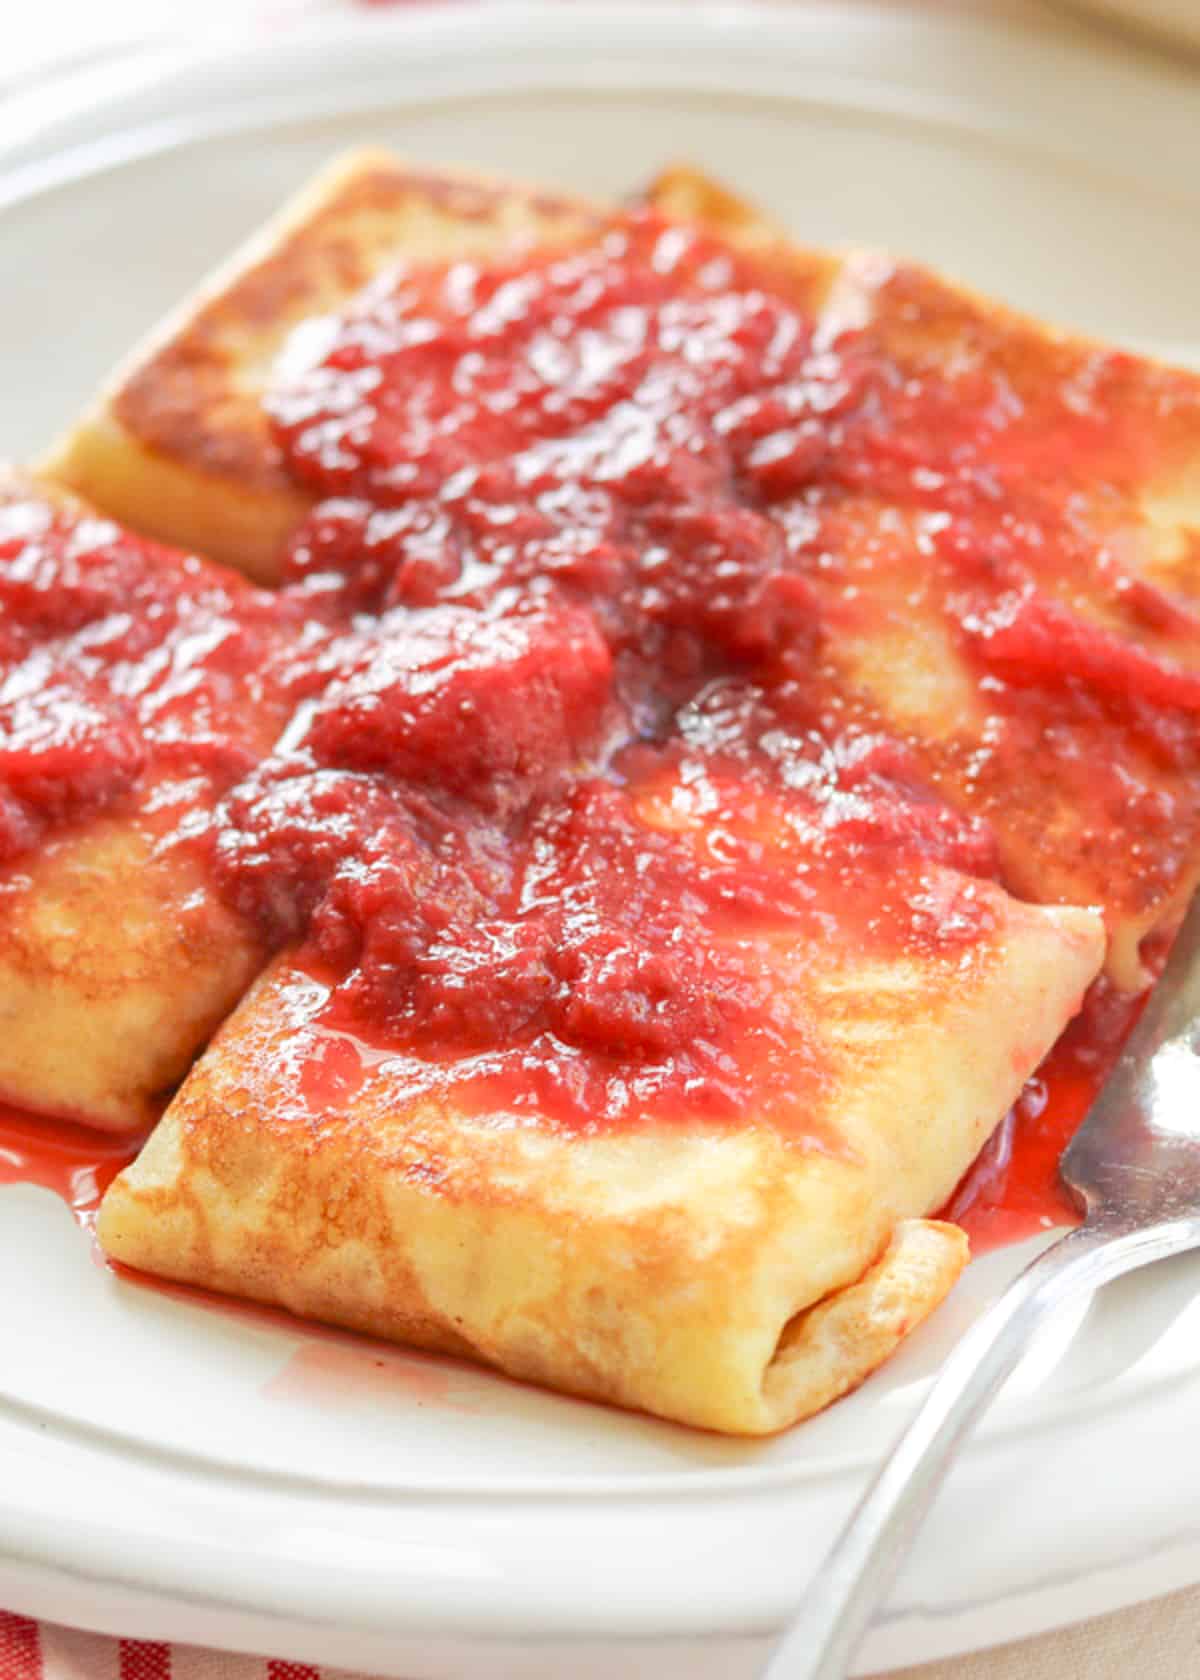 Learn how to Make Cheese Blintzes - Tasty Made Simple